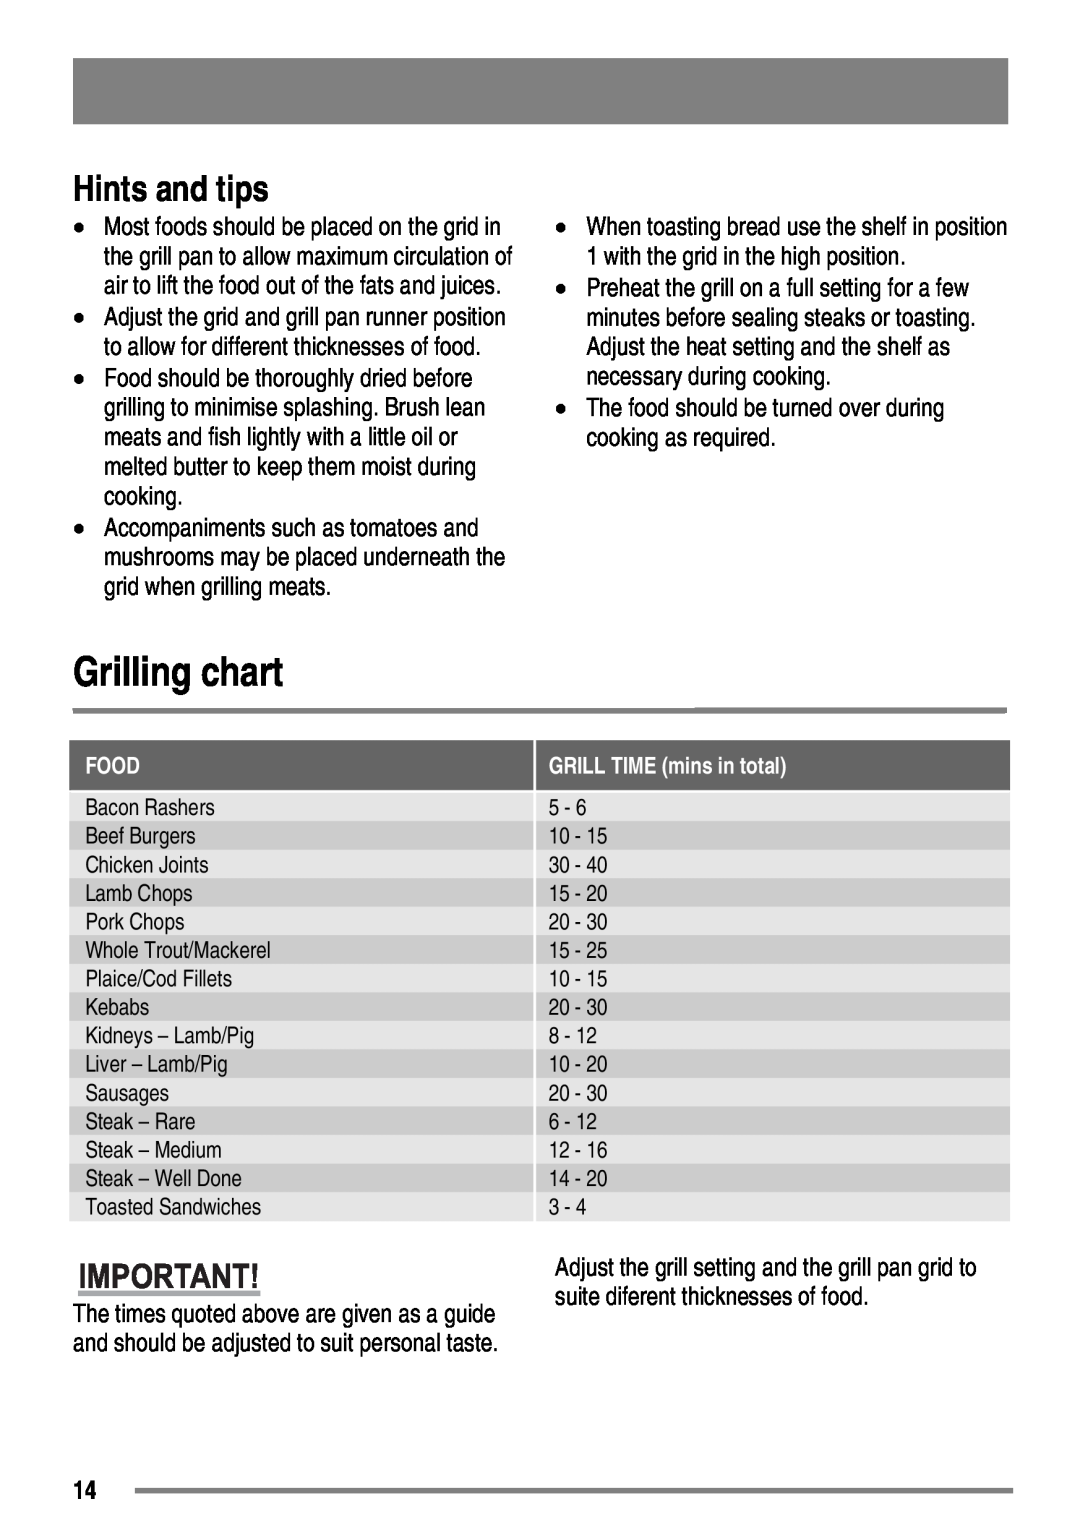 Zanussi ZKG6020 user manual Grilling chart, Hints and tips, The food should be turned over during cooking as required, Food 